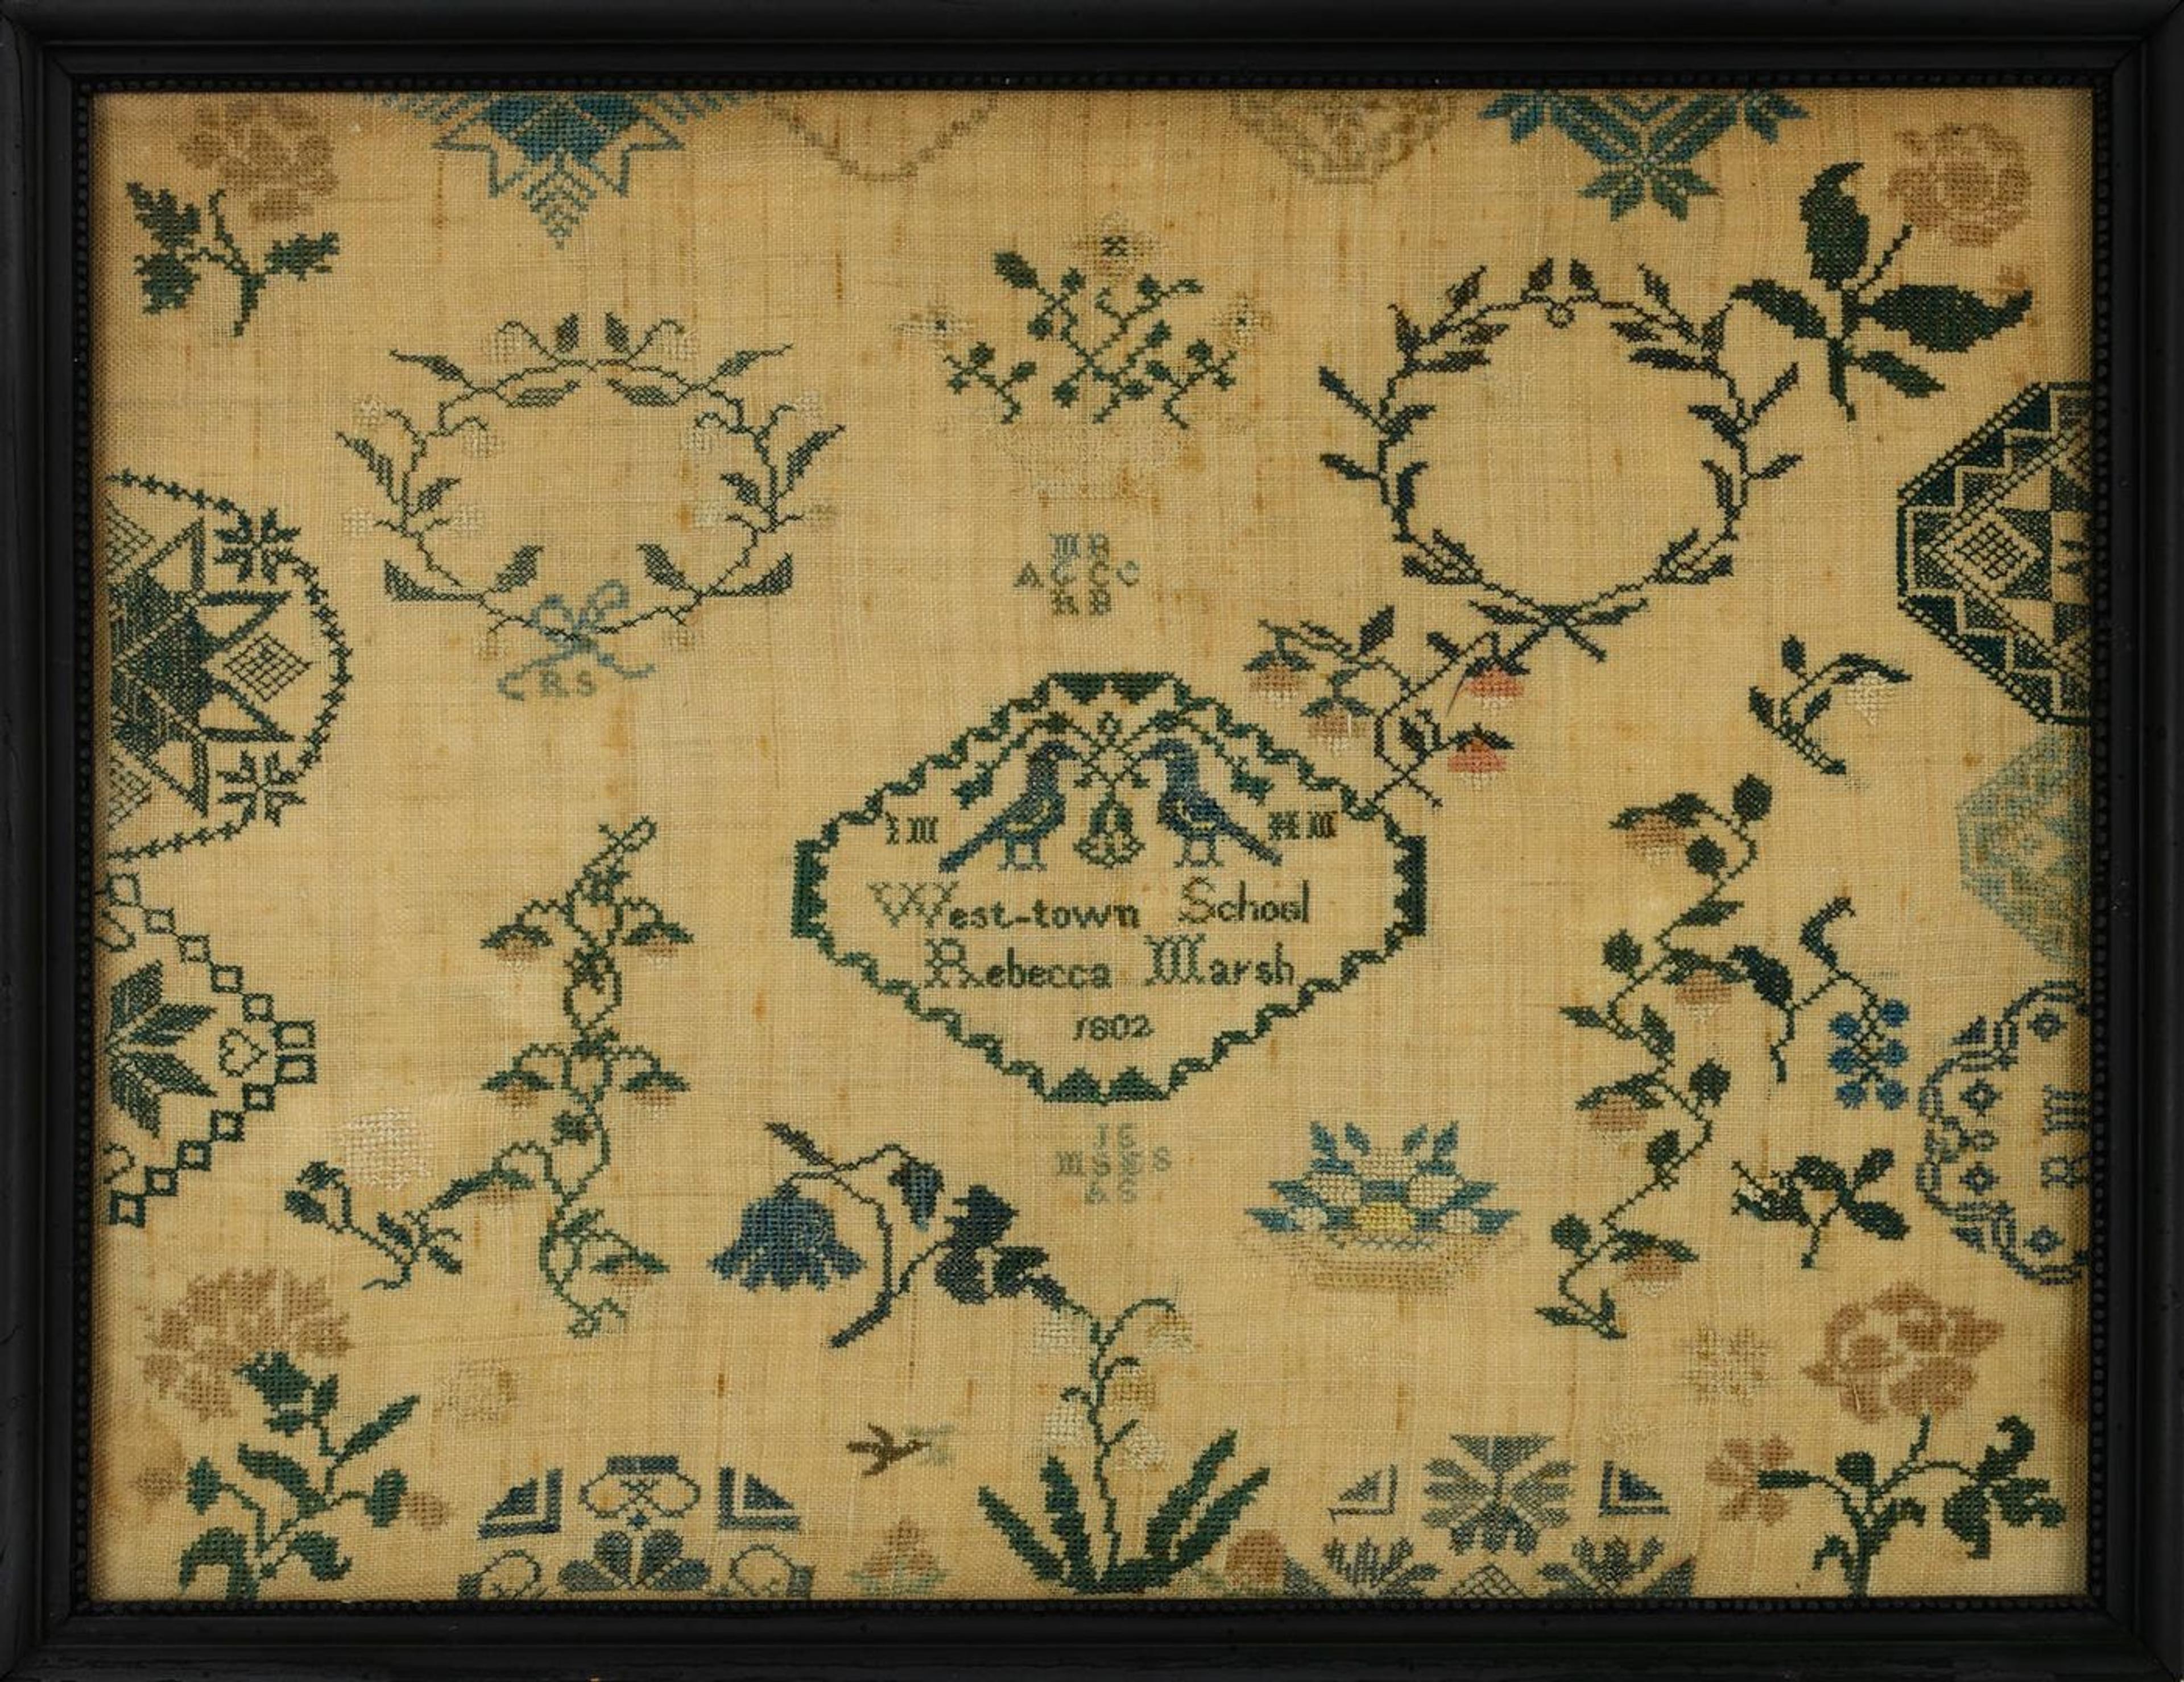 An image of a sampler by Rebecca Marsh. A design of yellow, blue, and pink flowers and rings of green leaves features Rebecca's name and school in the center.